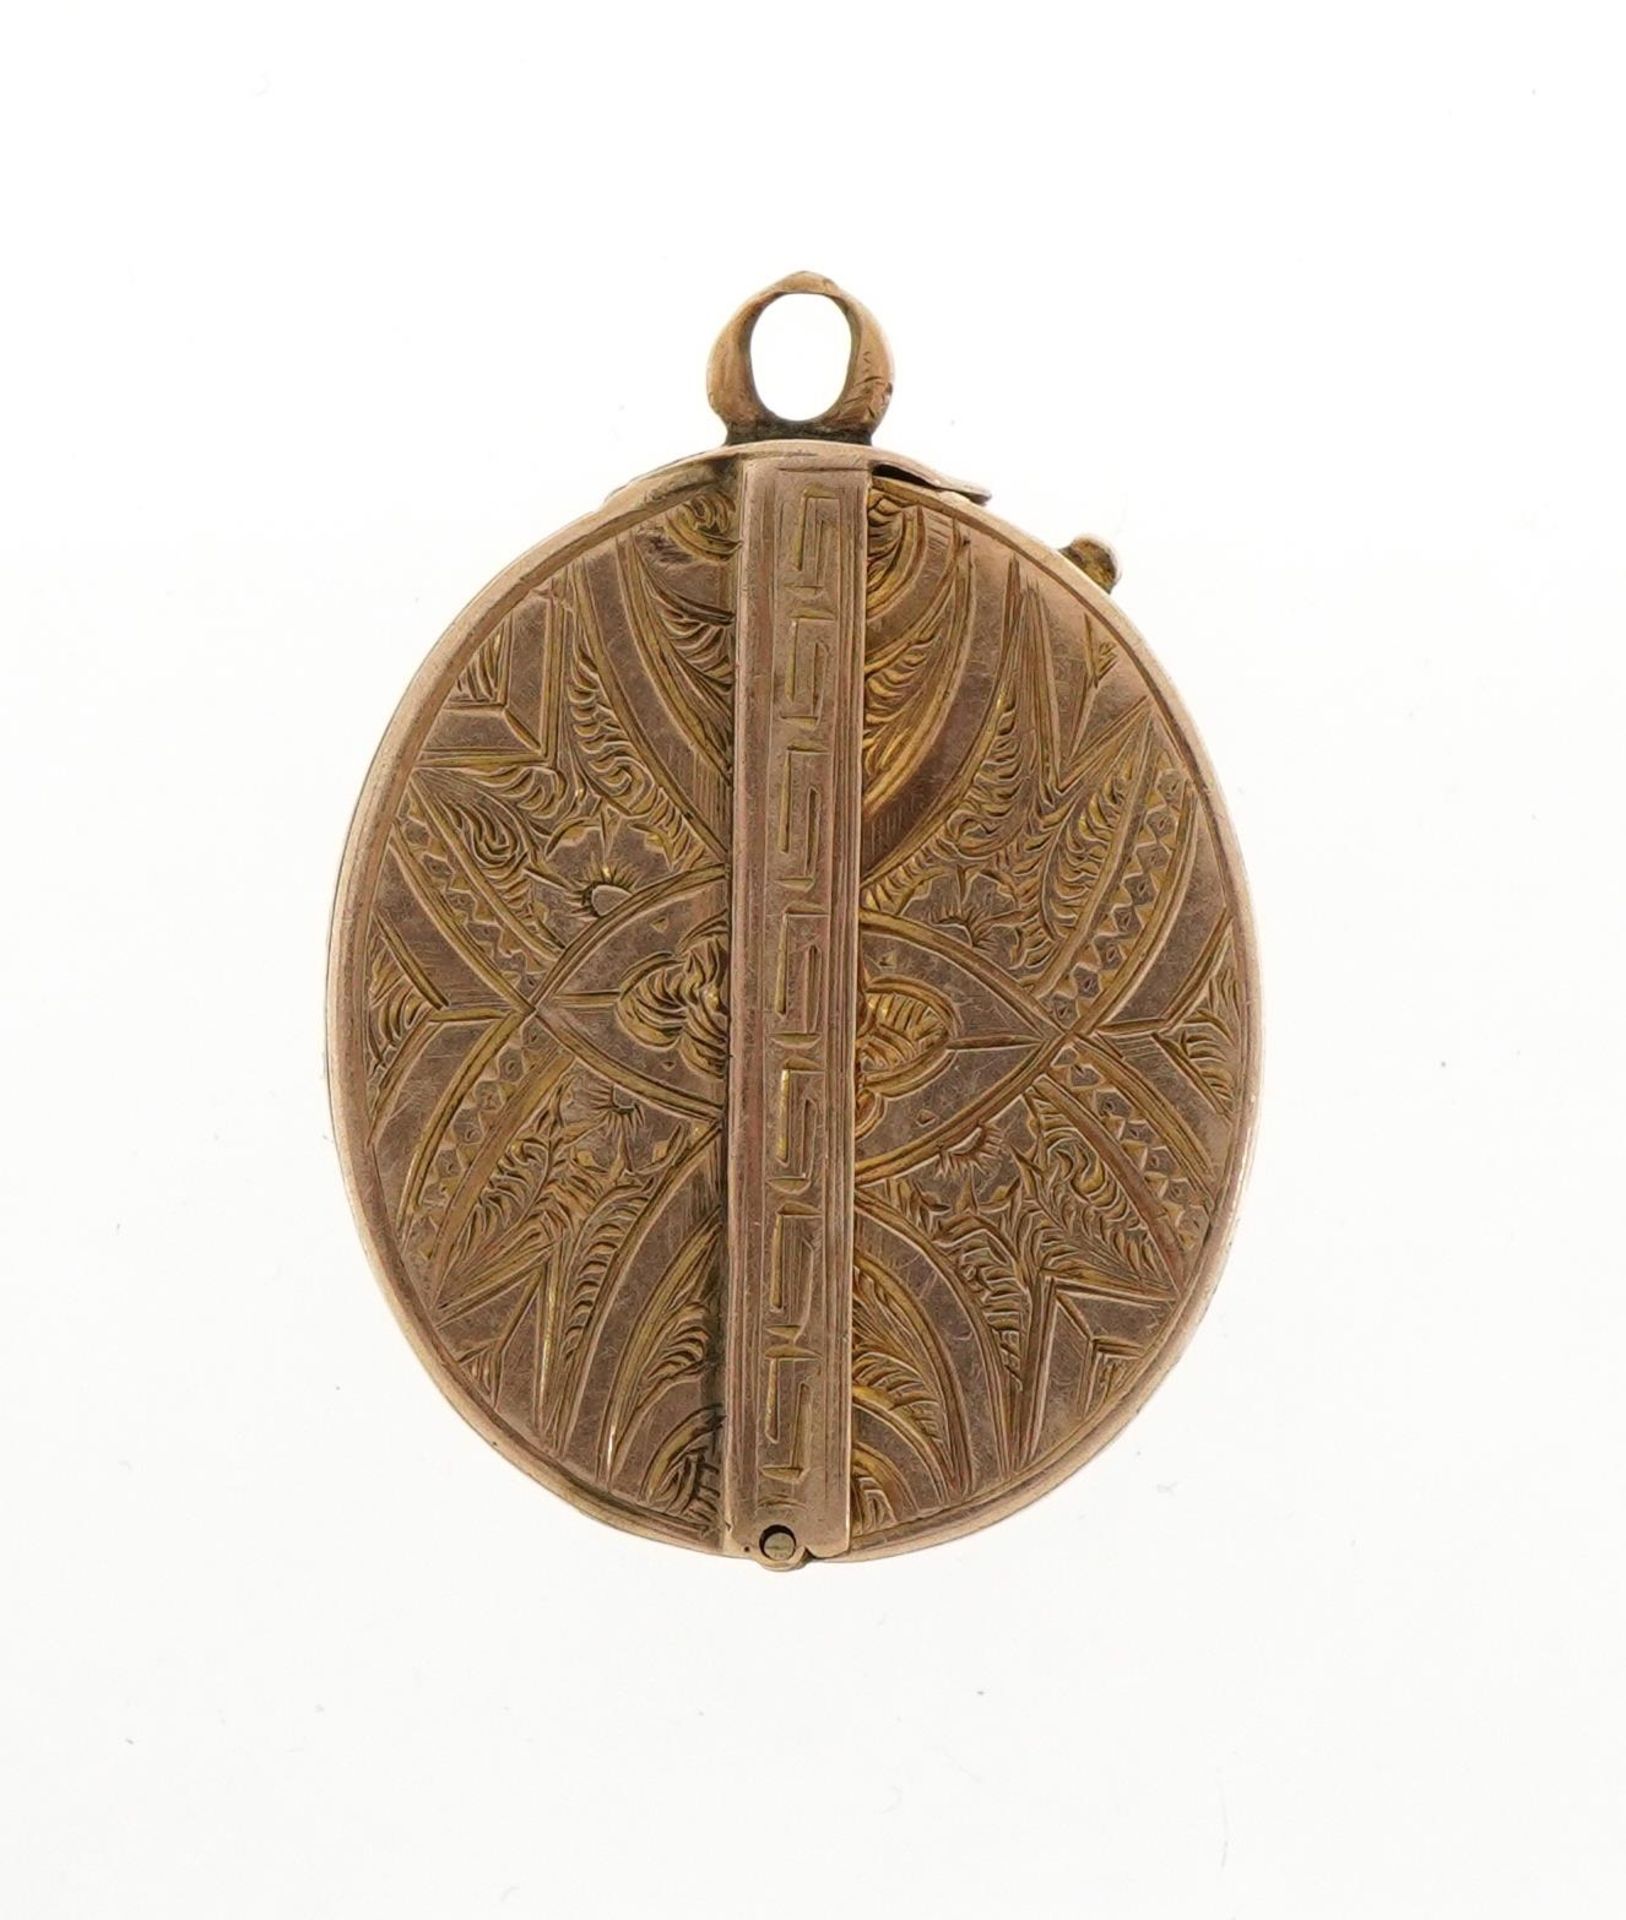 Unmarked gold oval folding locket with engraved floral and Greek key decoration, tests as 9ct